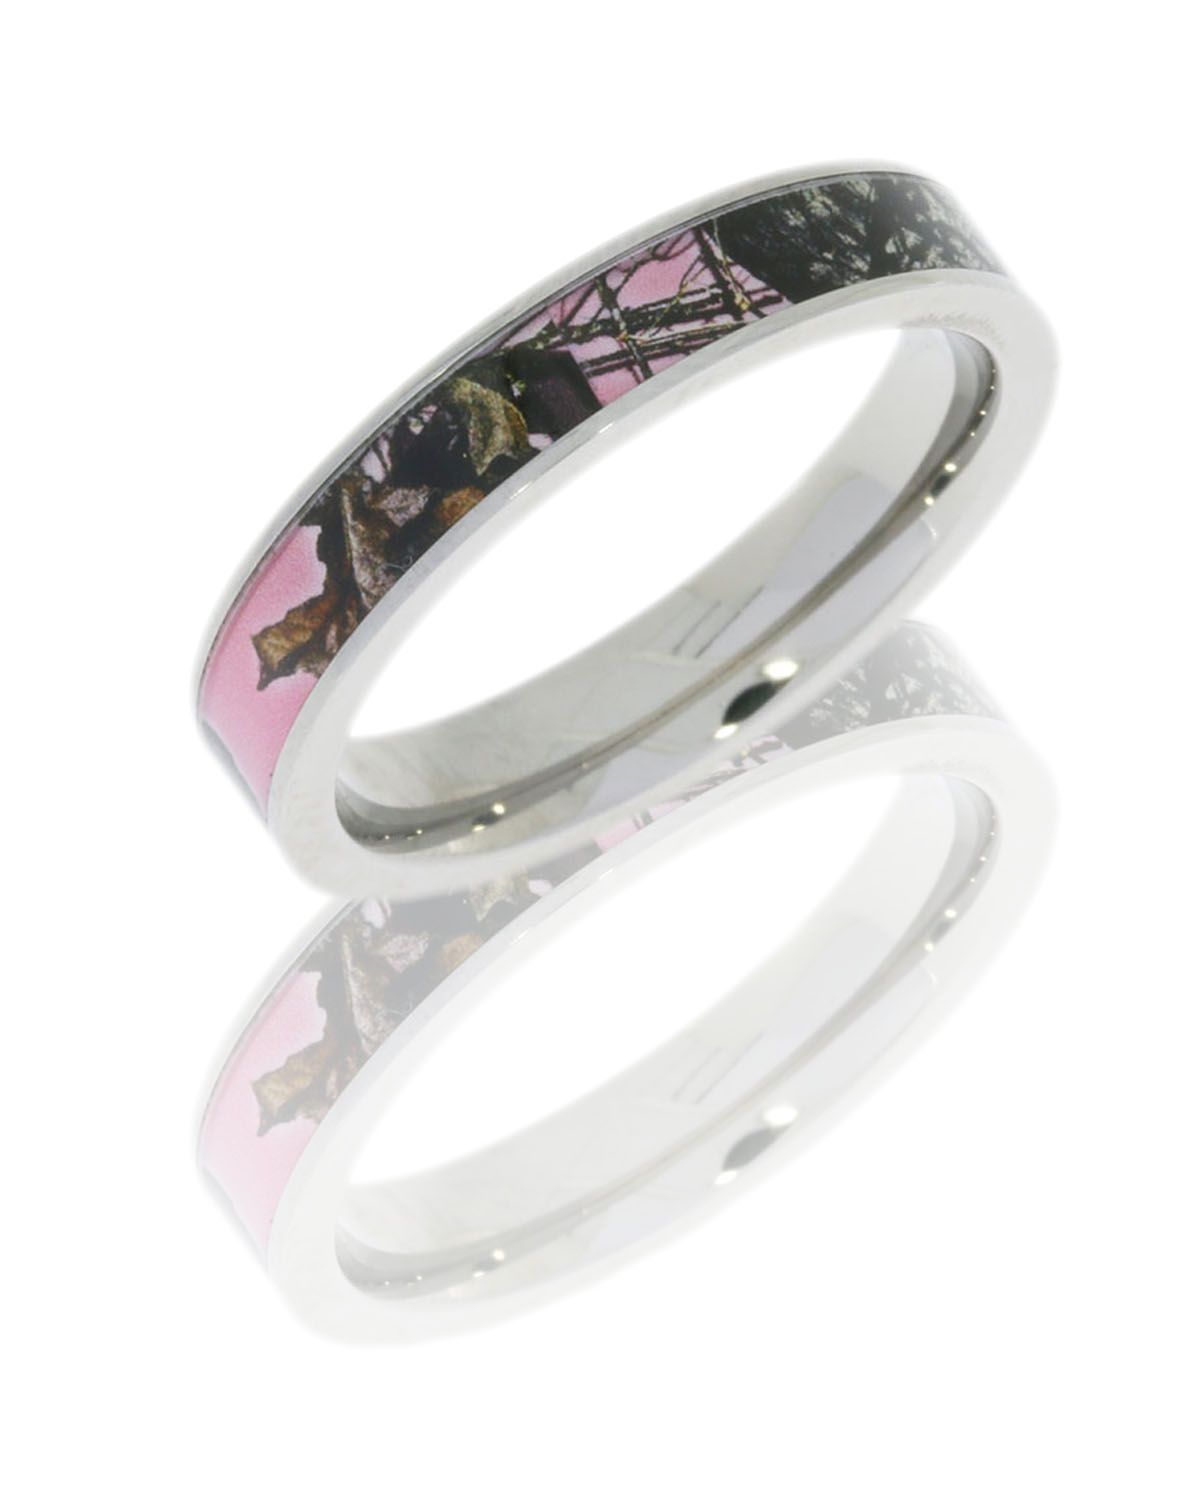 Cobalt Chrome Ring With A Real Tree Pink Camo Inlay (View 15 of 15)